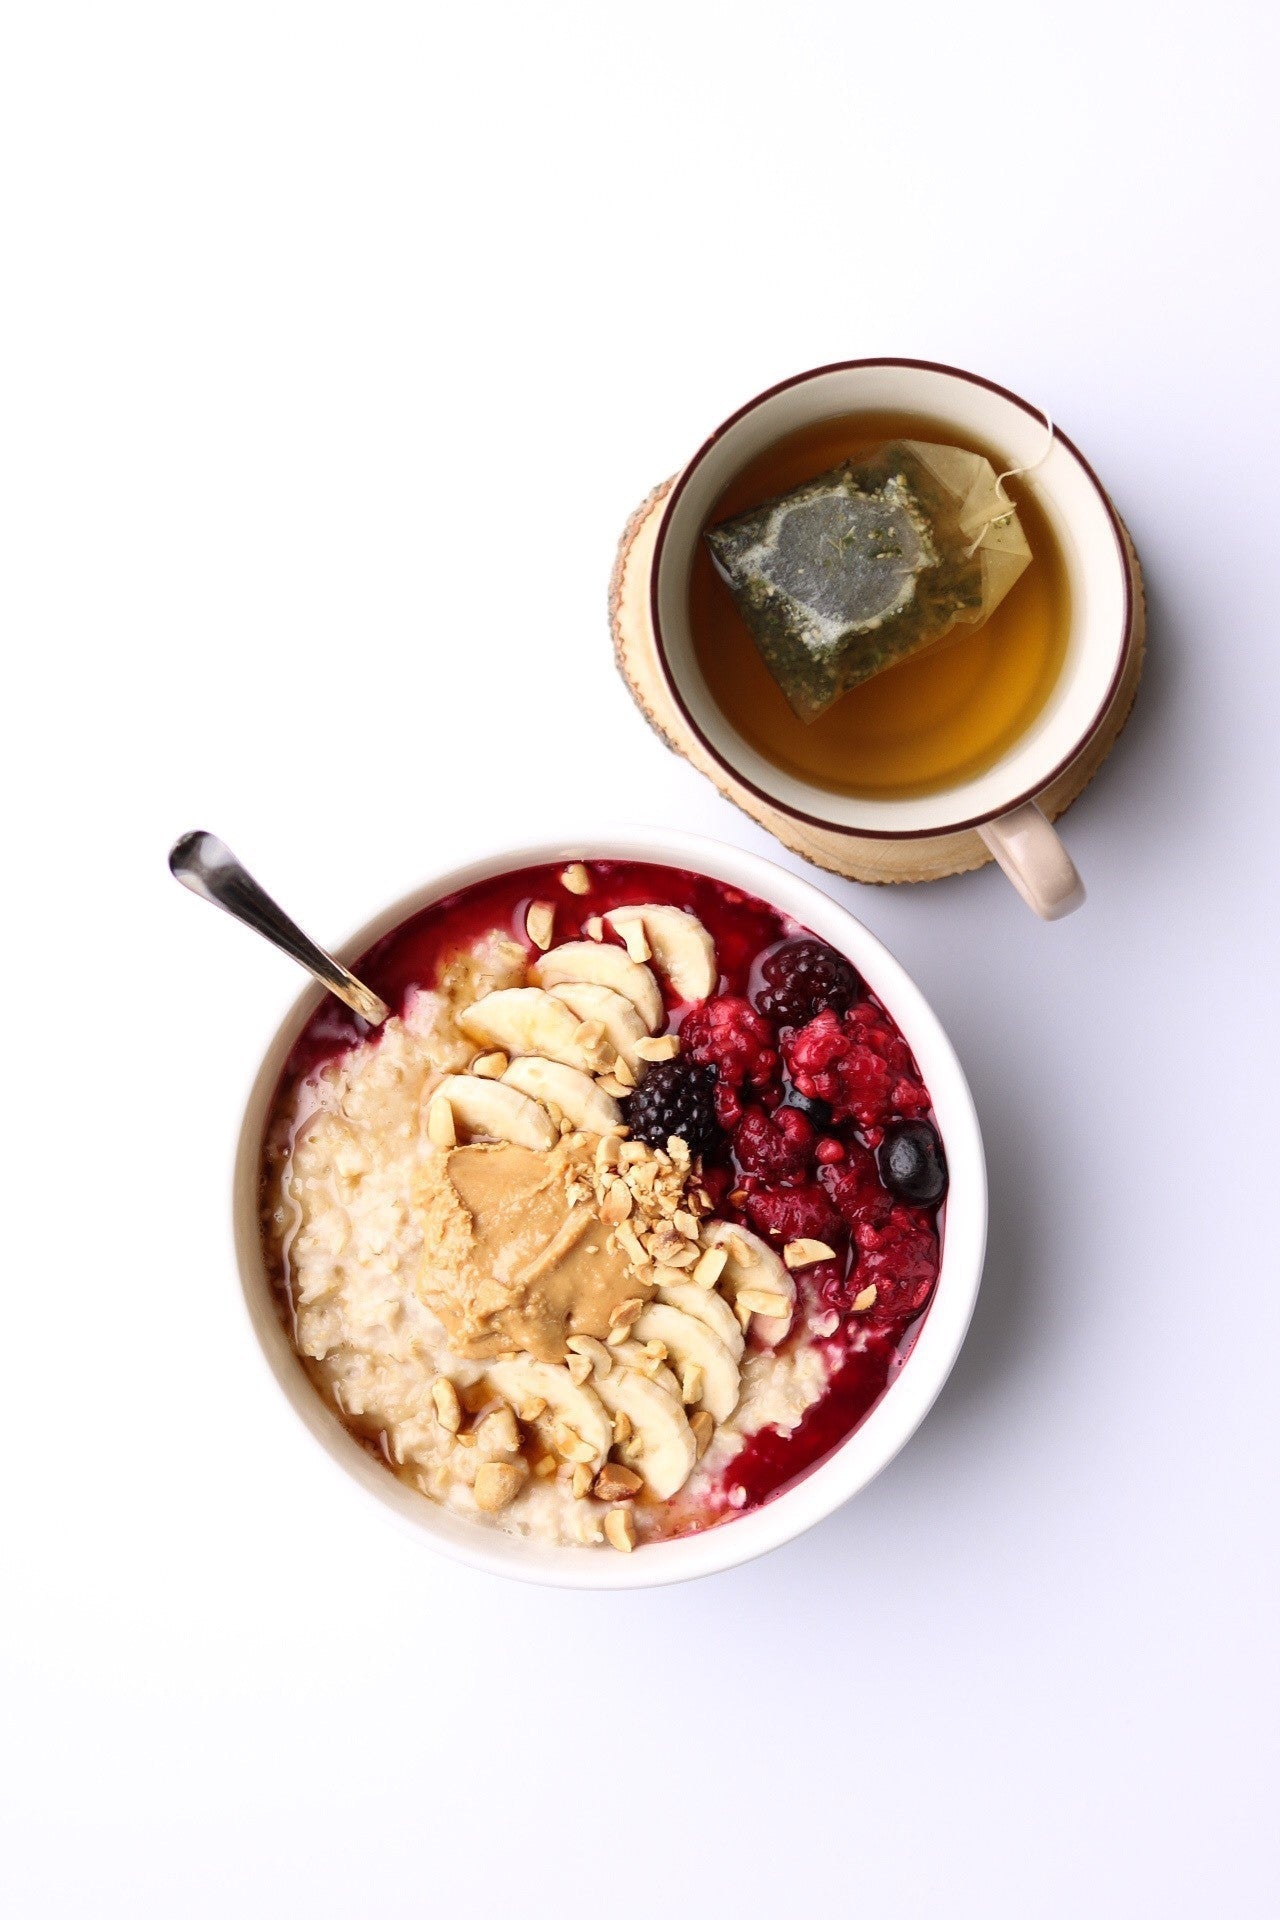 How To Build The Perfect Oatmeal Bowl